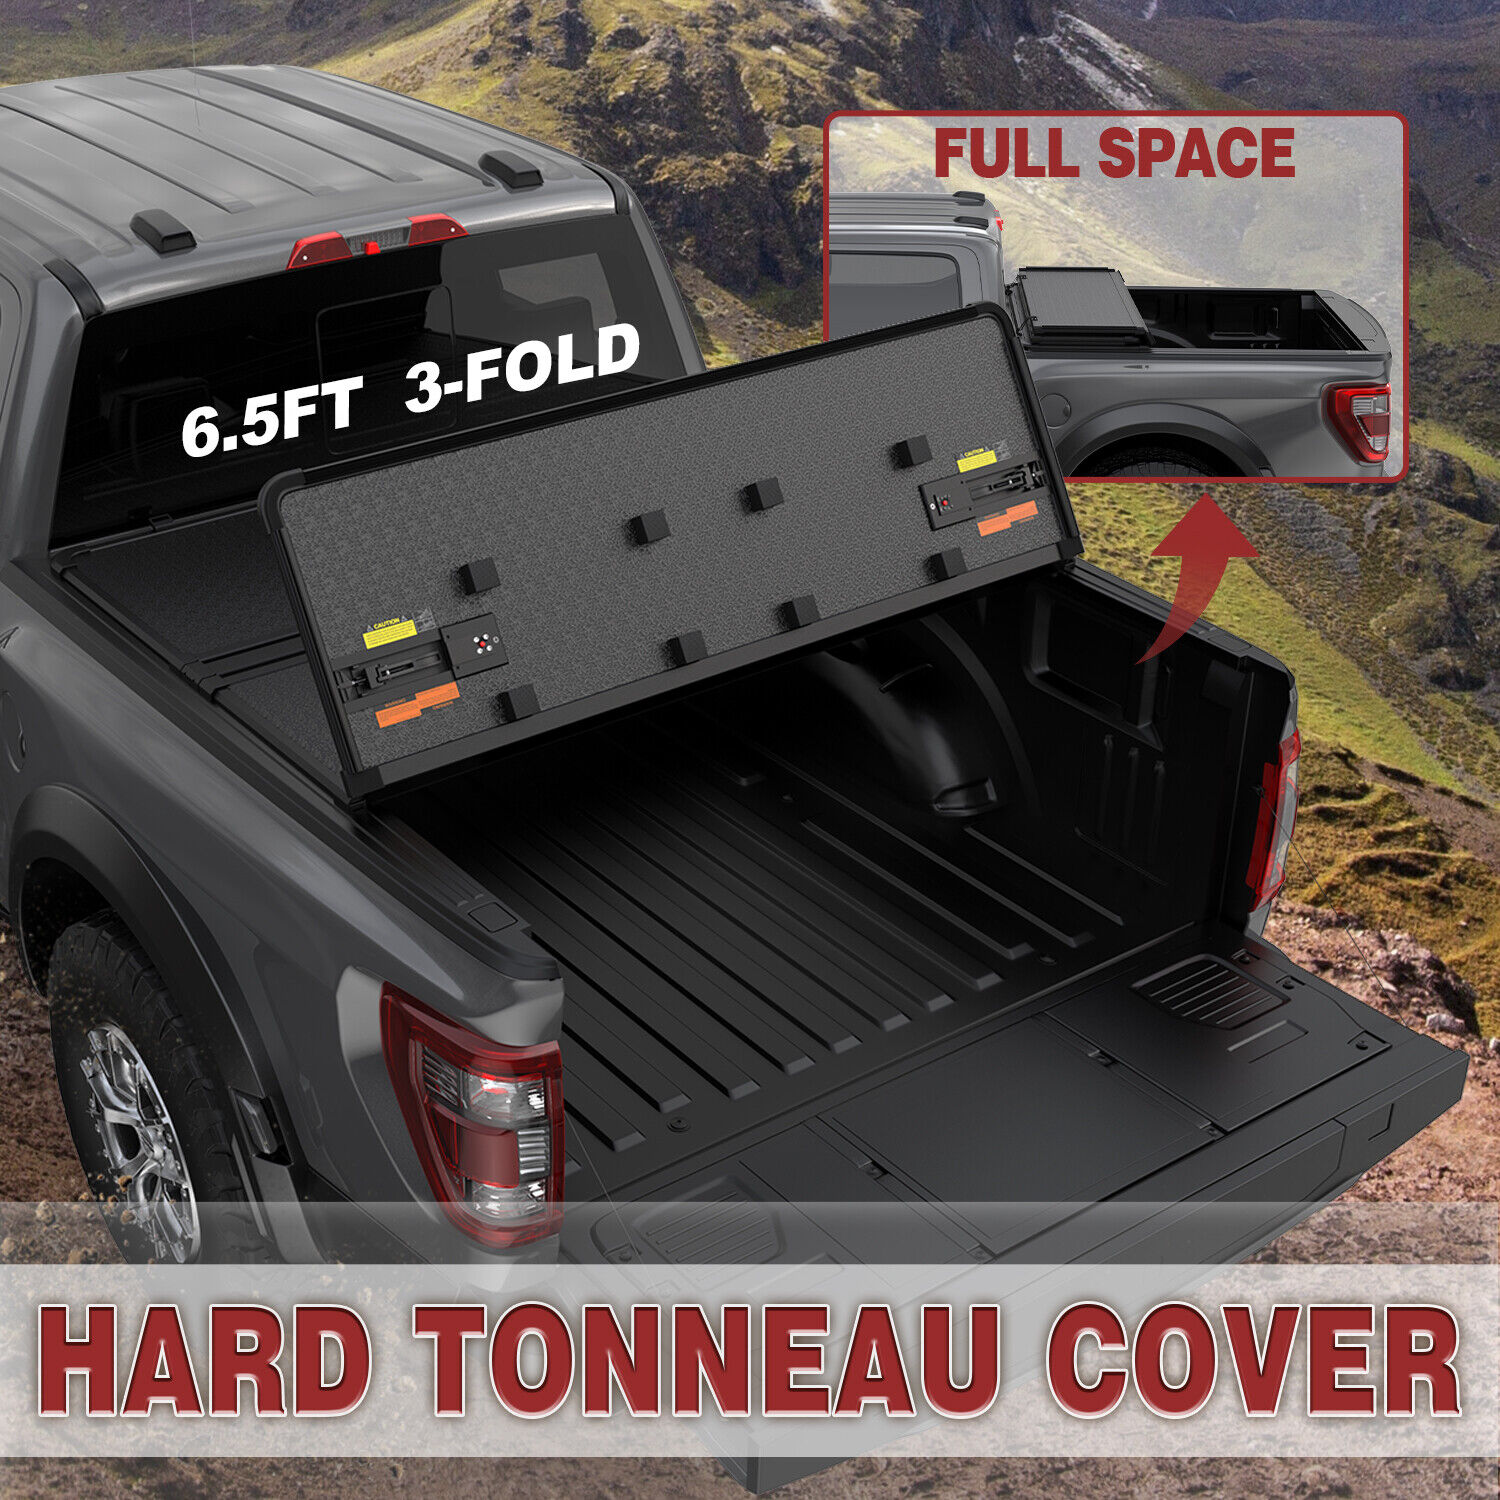 6.5FT 3-Fold Hard Tonneau Cover For 2015-24 Ford F150 Long Bed Truck w/ LED Lamp